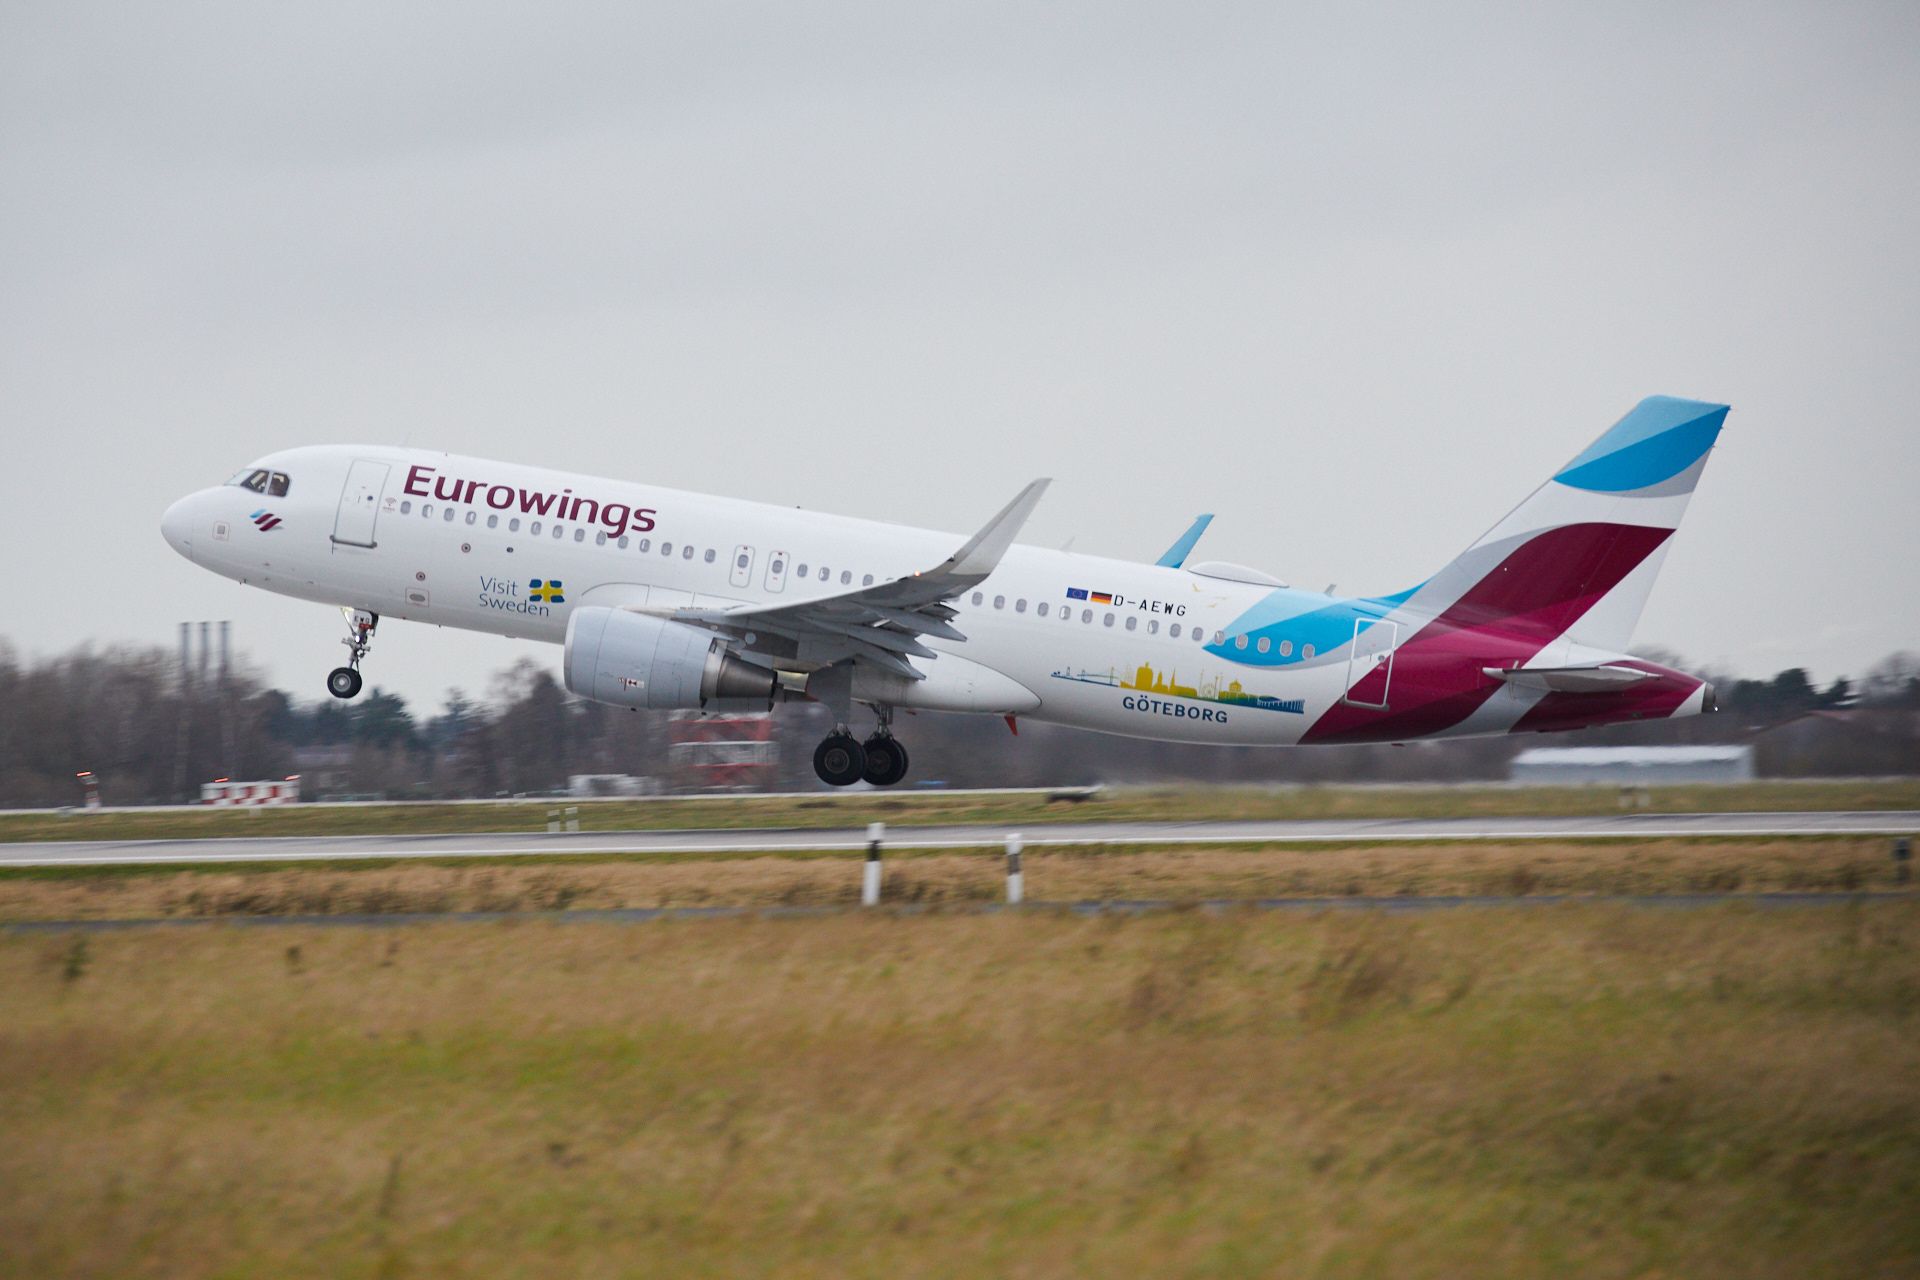 Eurowings_A320_departing_from_Airport_DUS-2